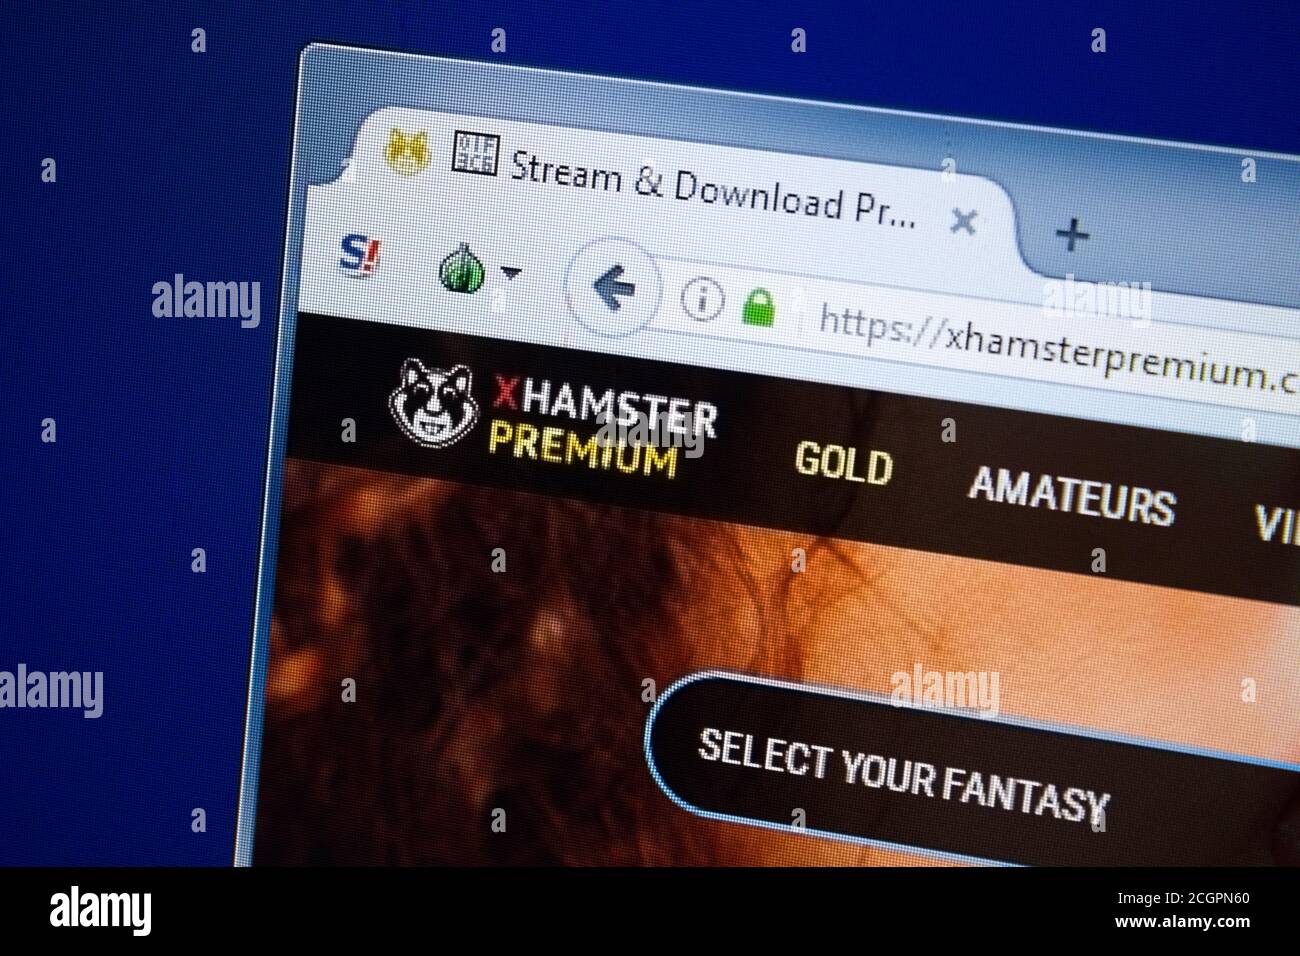 how to download videos from xhamster premium